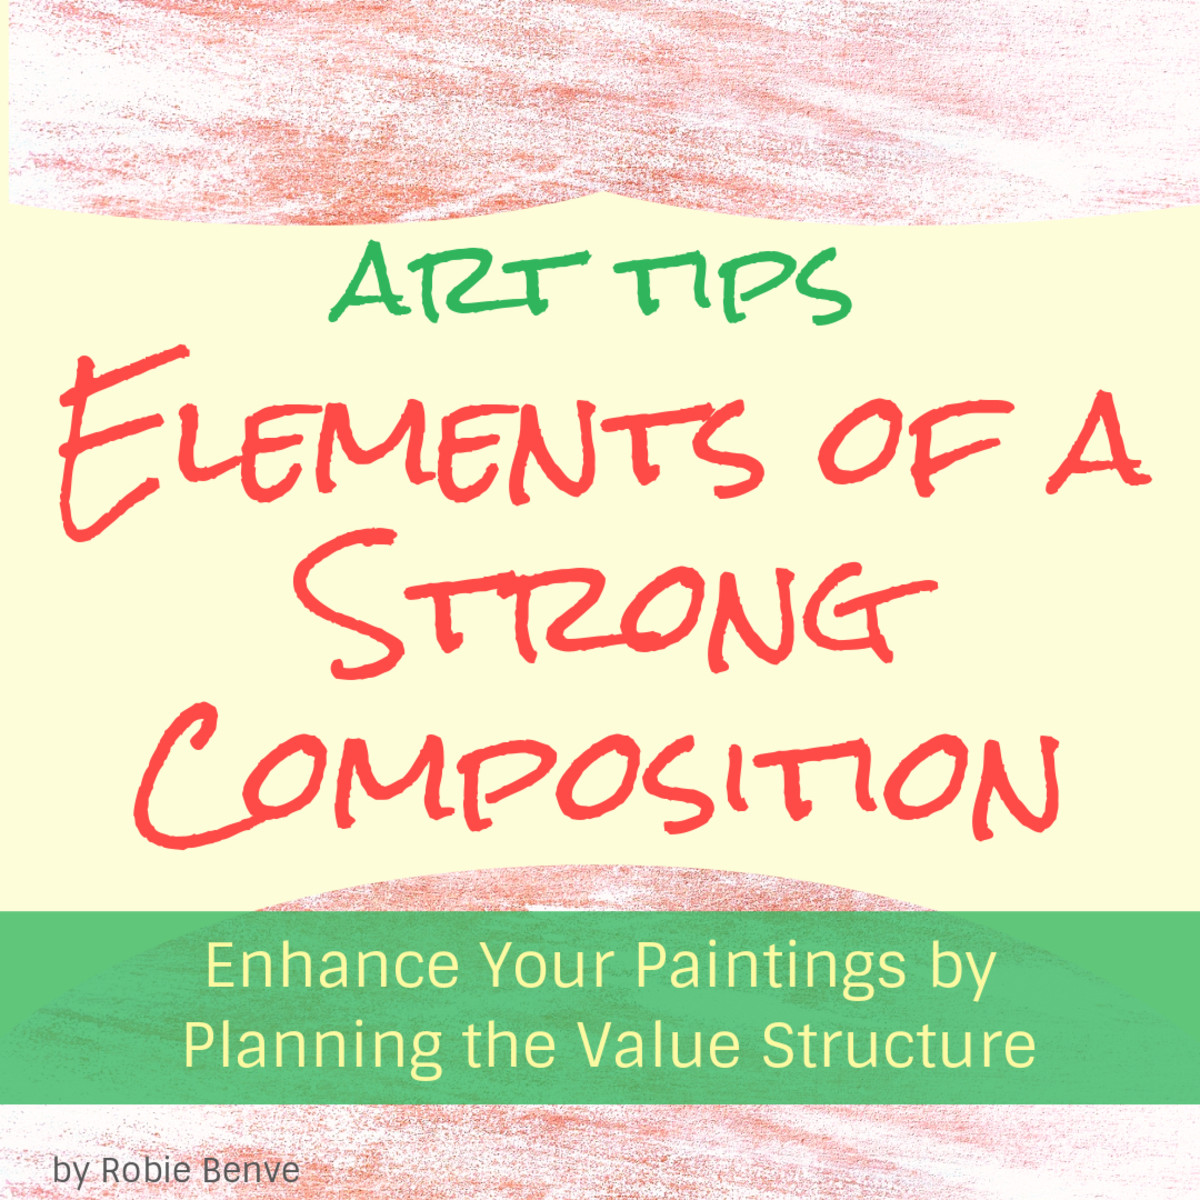 Enhance Your Painting Composition by Planning the Value Structure ...